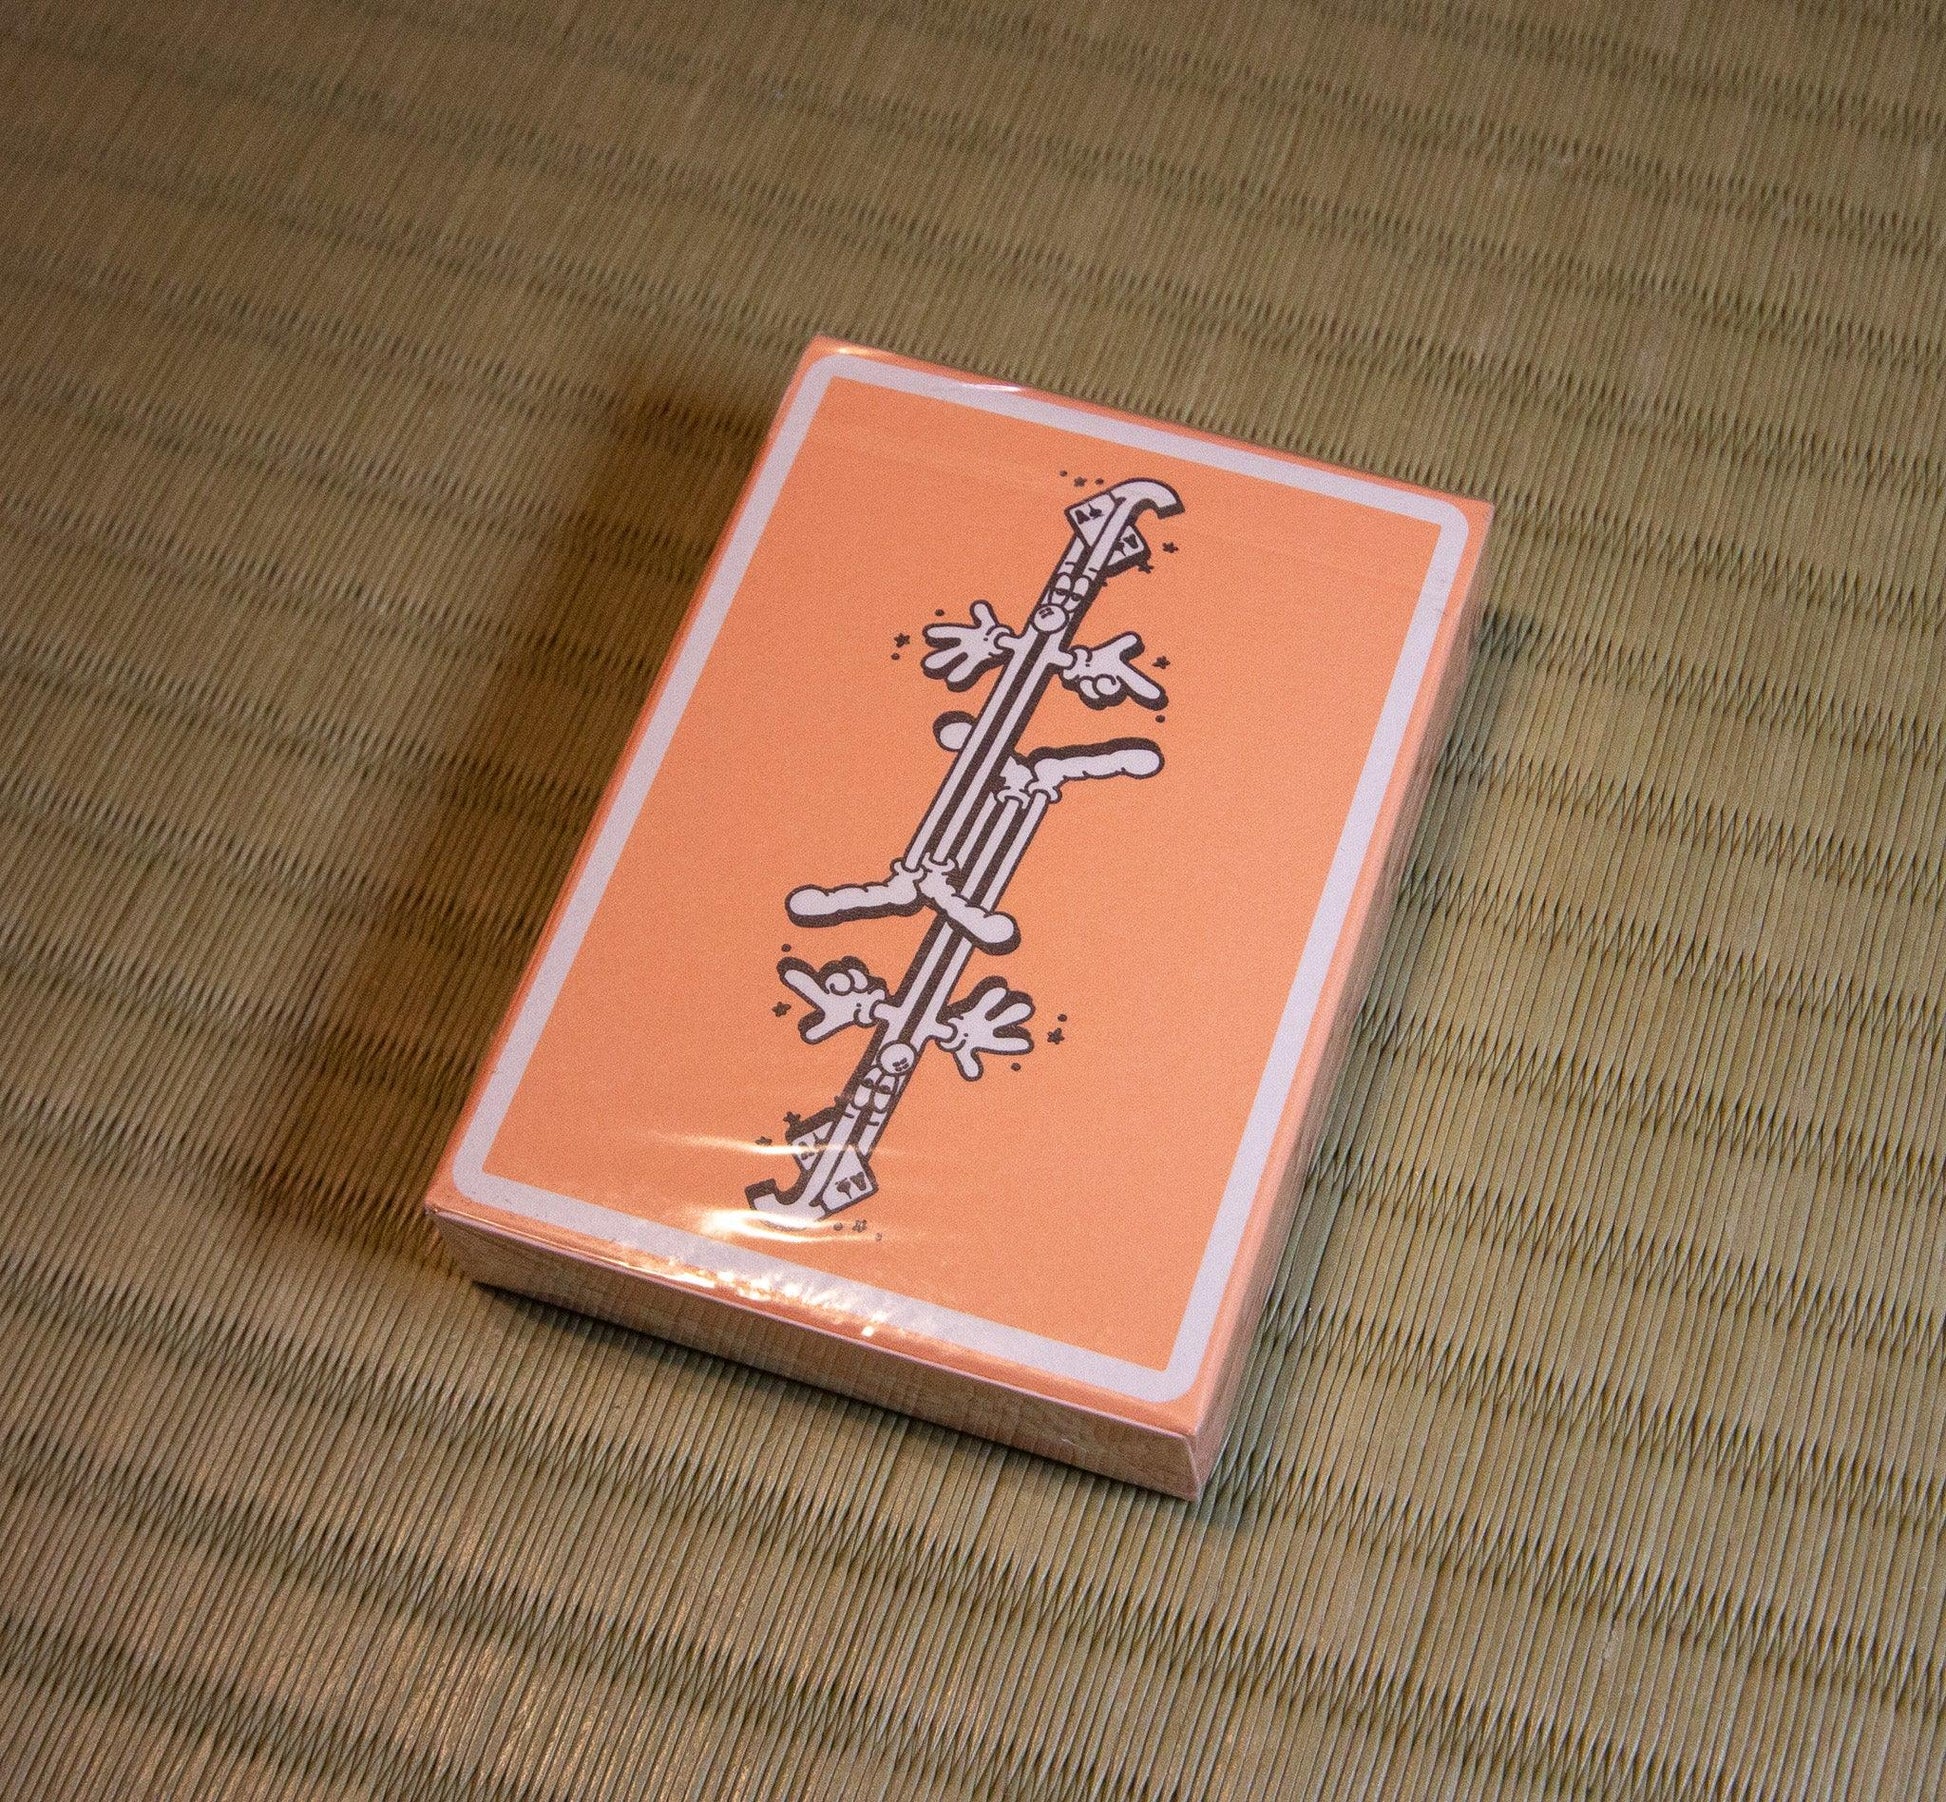 Good Company V2 Fontaine Playing Cards by Fontaine Cards - Deckita Decks